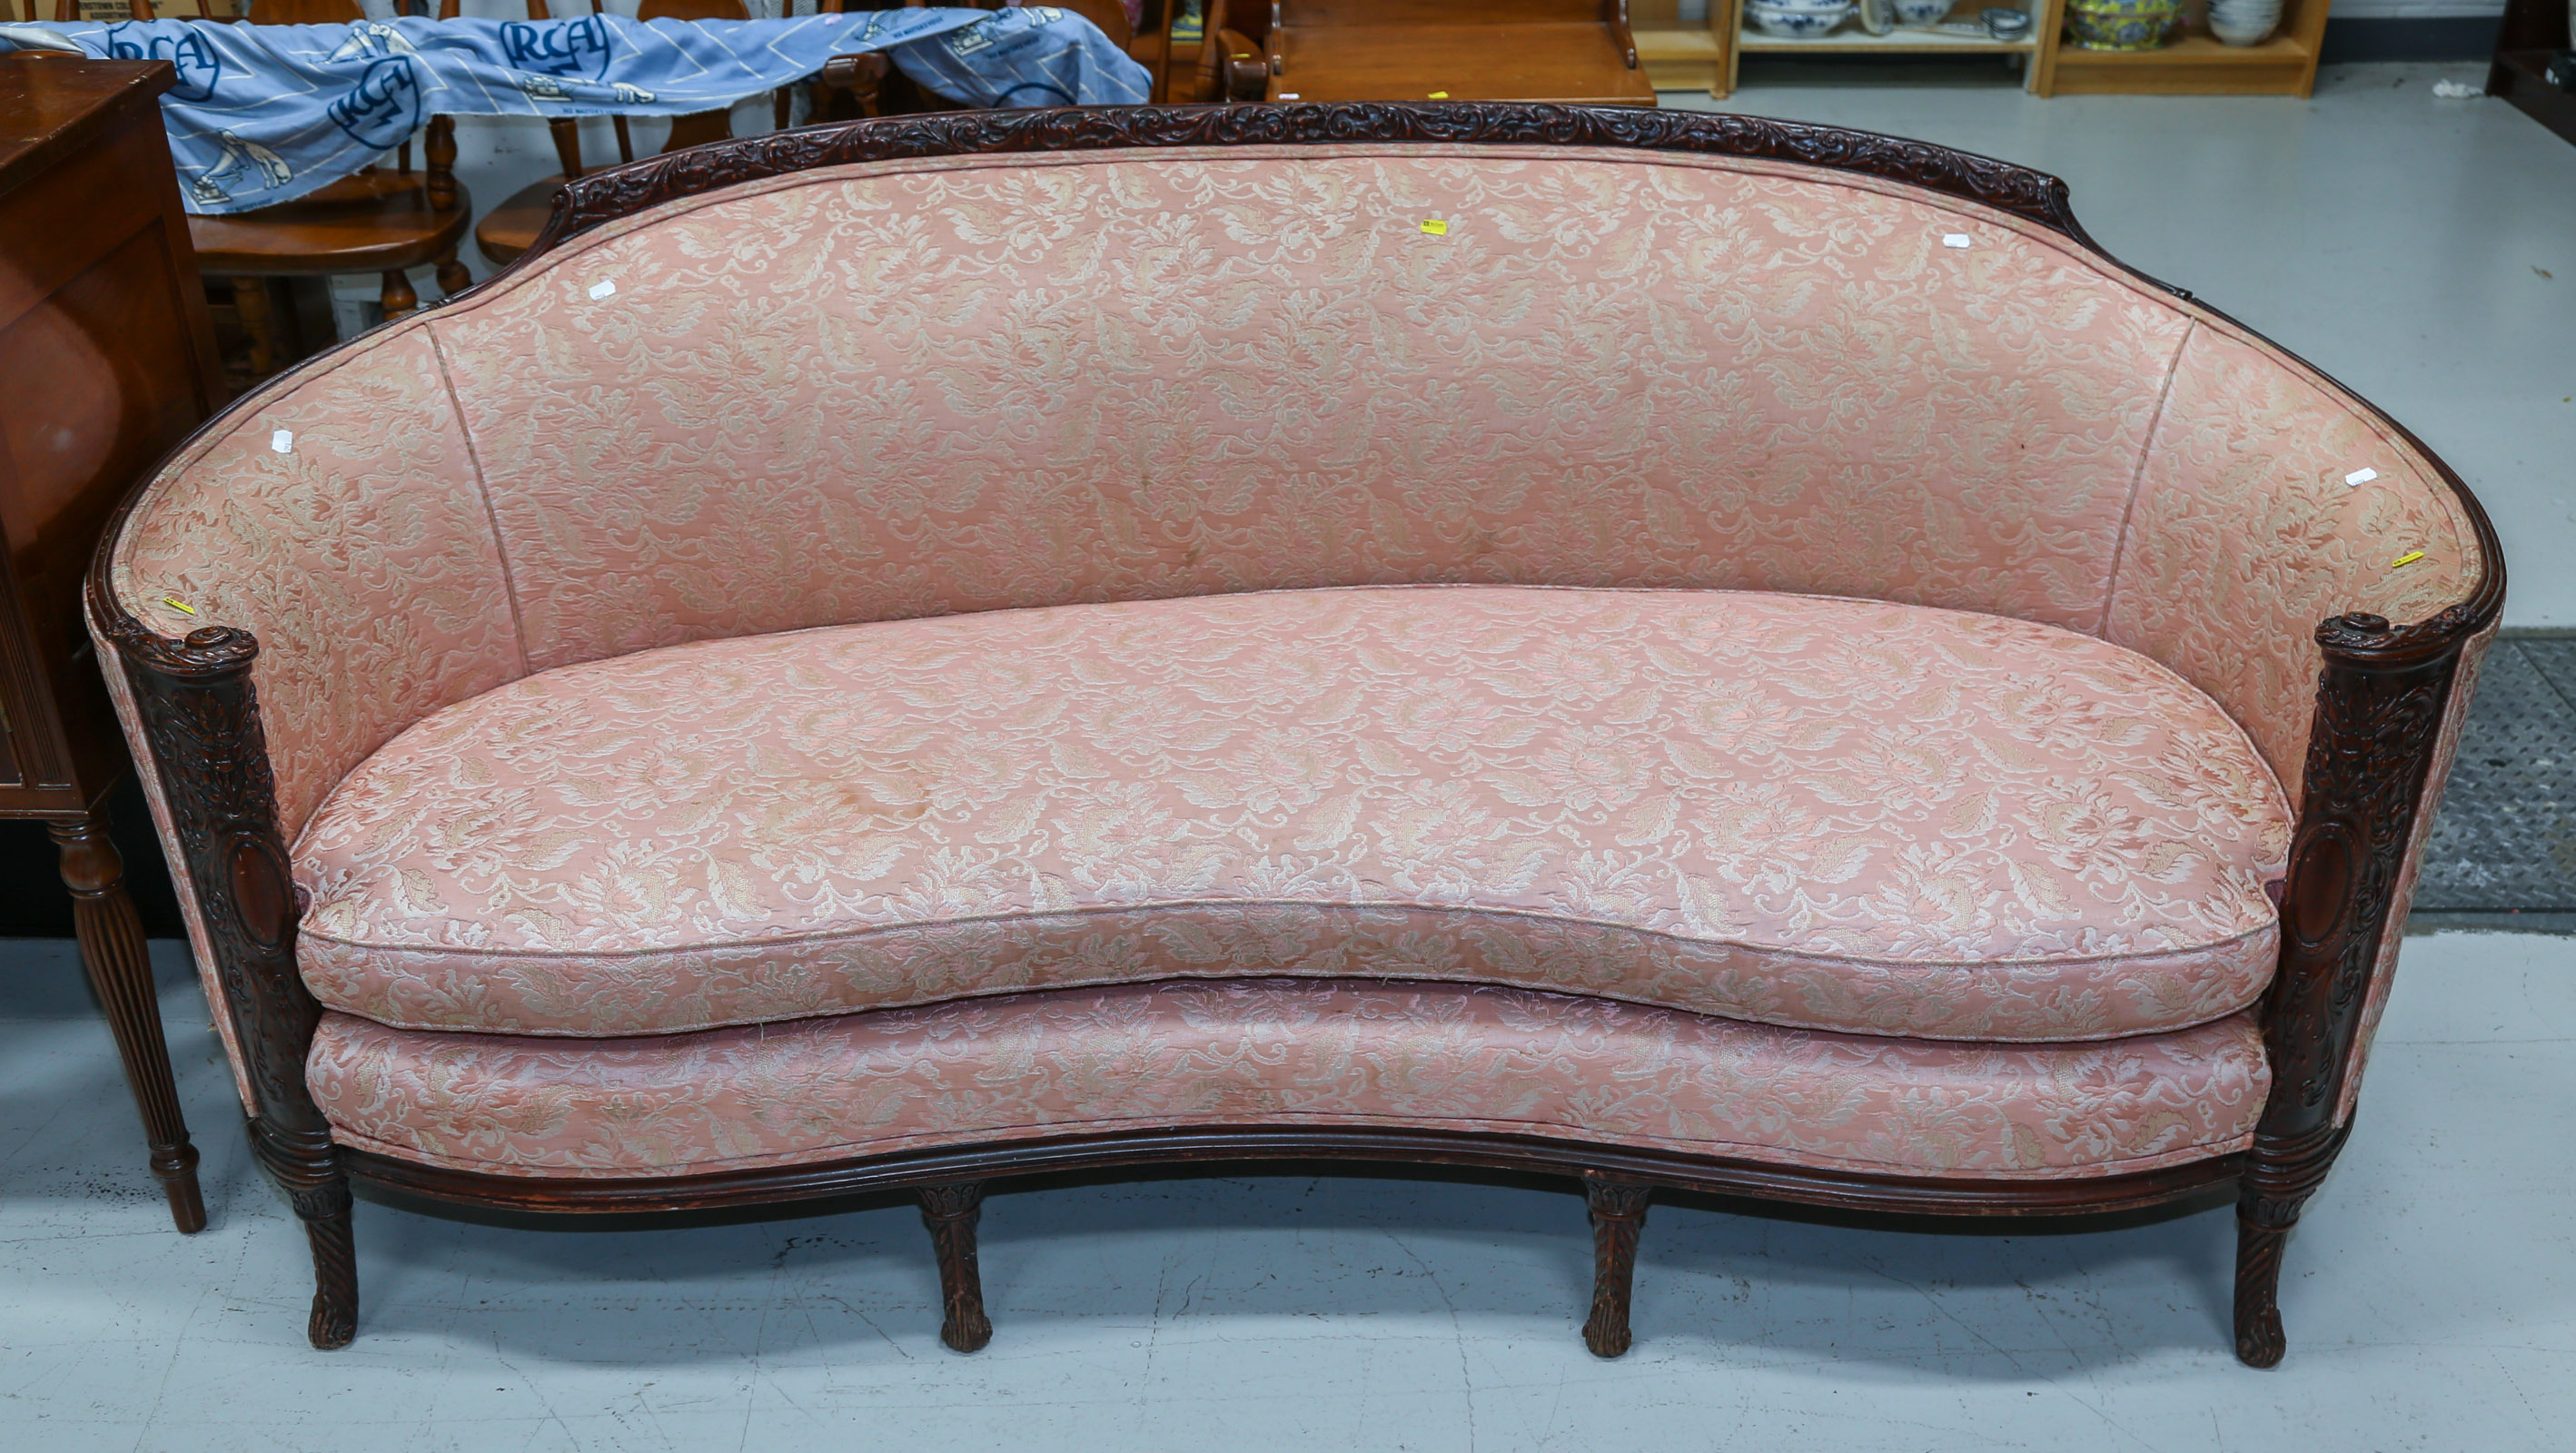 A FRENCH REVIVAL STYLE SOFA 1st 3cb2d8